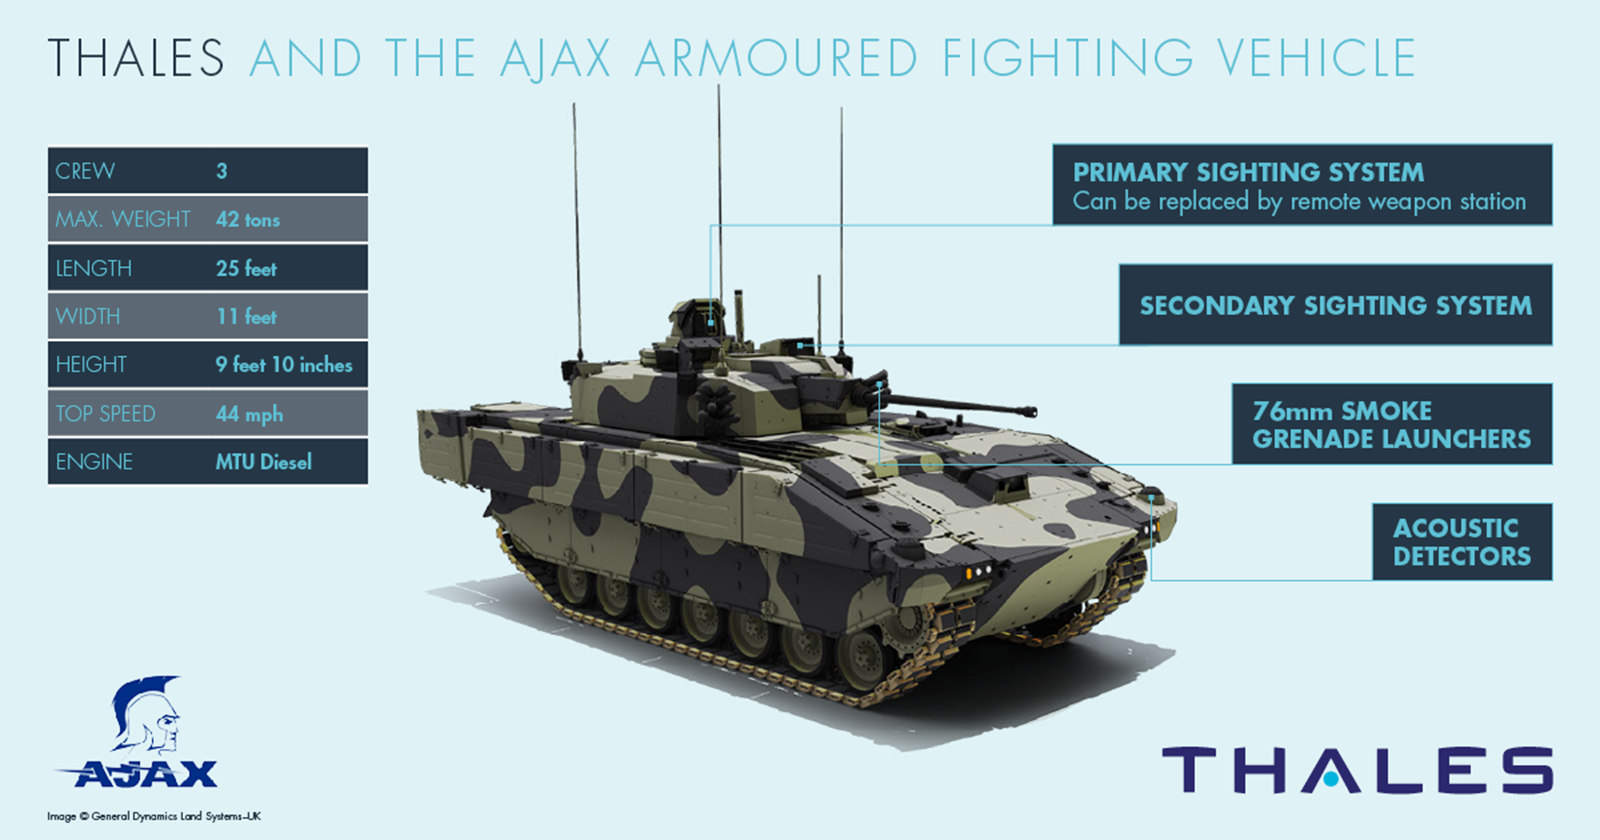 New acoustic shot detection system to protect Ajax vehicle crews